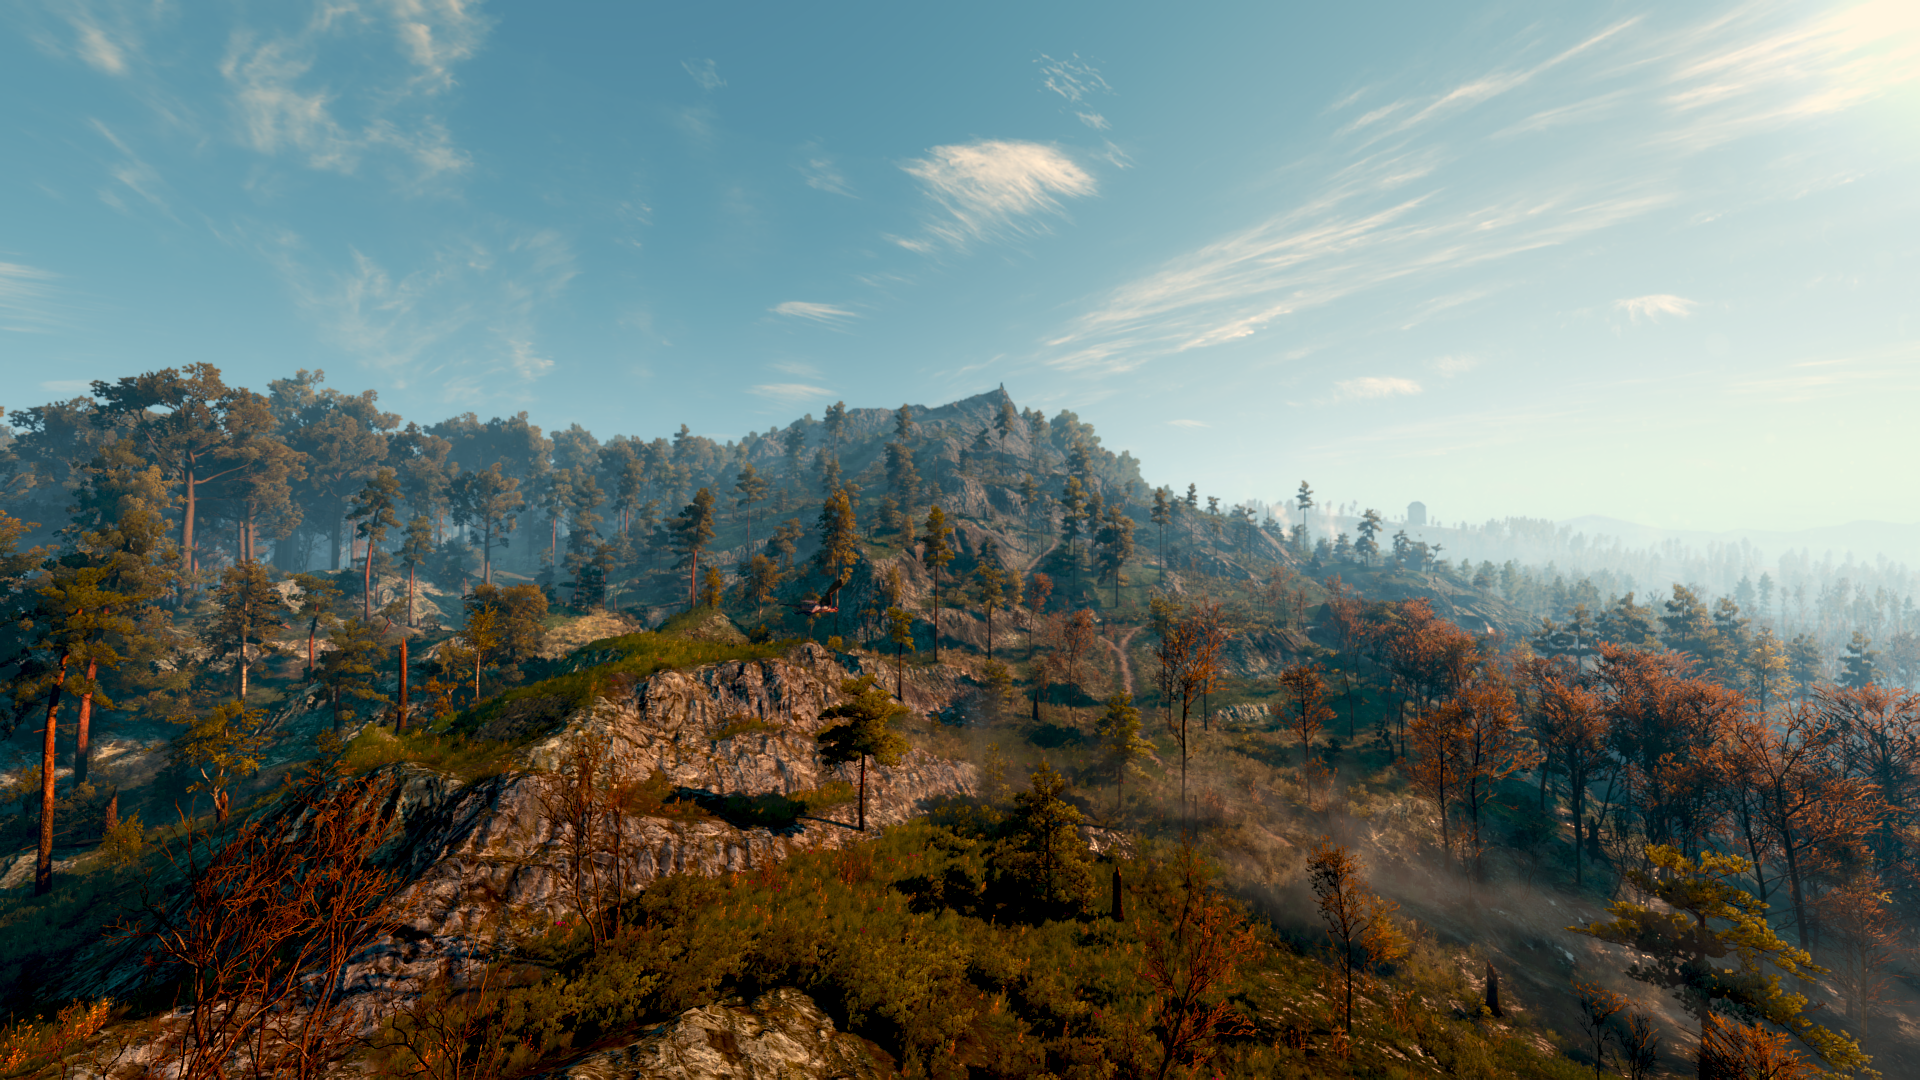 The Witcher 3 Wild Hunt The Witcher Video Game Landscape Medieval 1920x1080